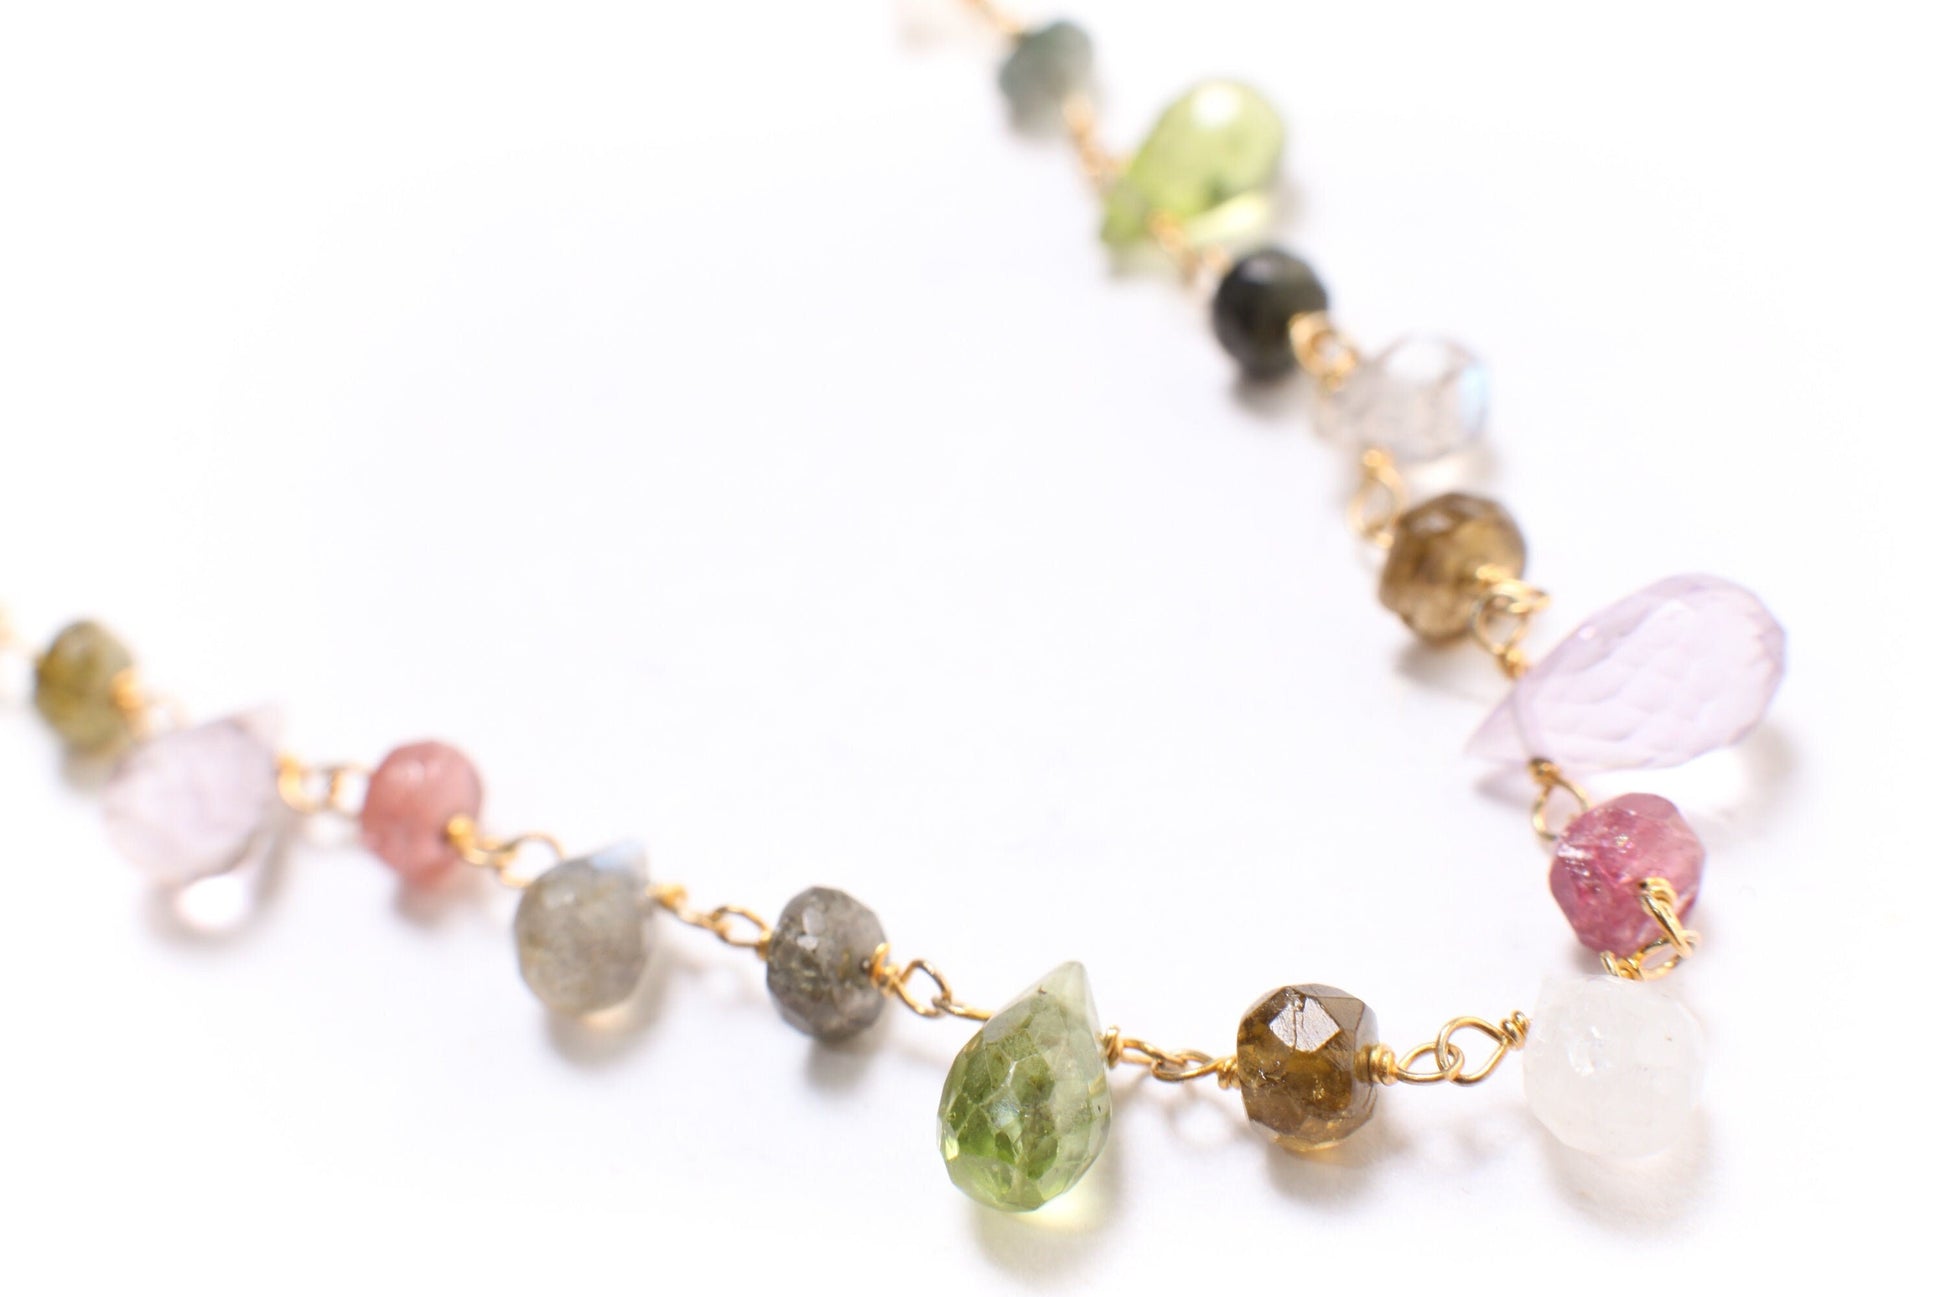 Multi Gemstones Necklace Wire Wrapped Faceted Peridot, Moonstone Briolette Drop 4x6-5x9mm,Rondelle in 14K Gold Filled Chain & Clasp Necklace